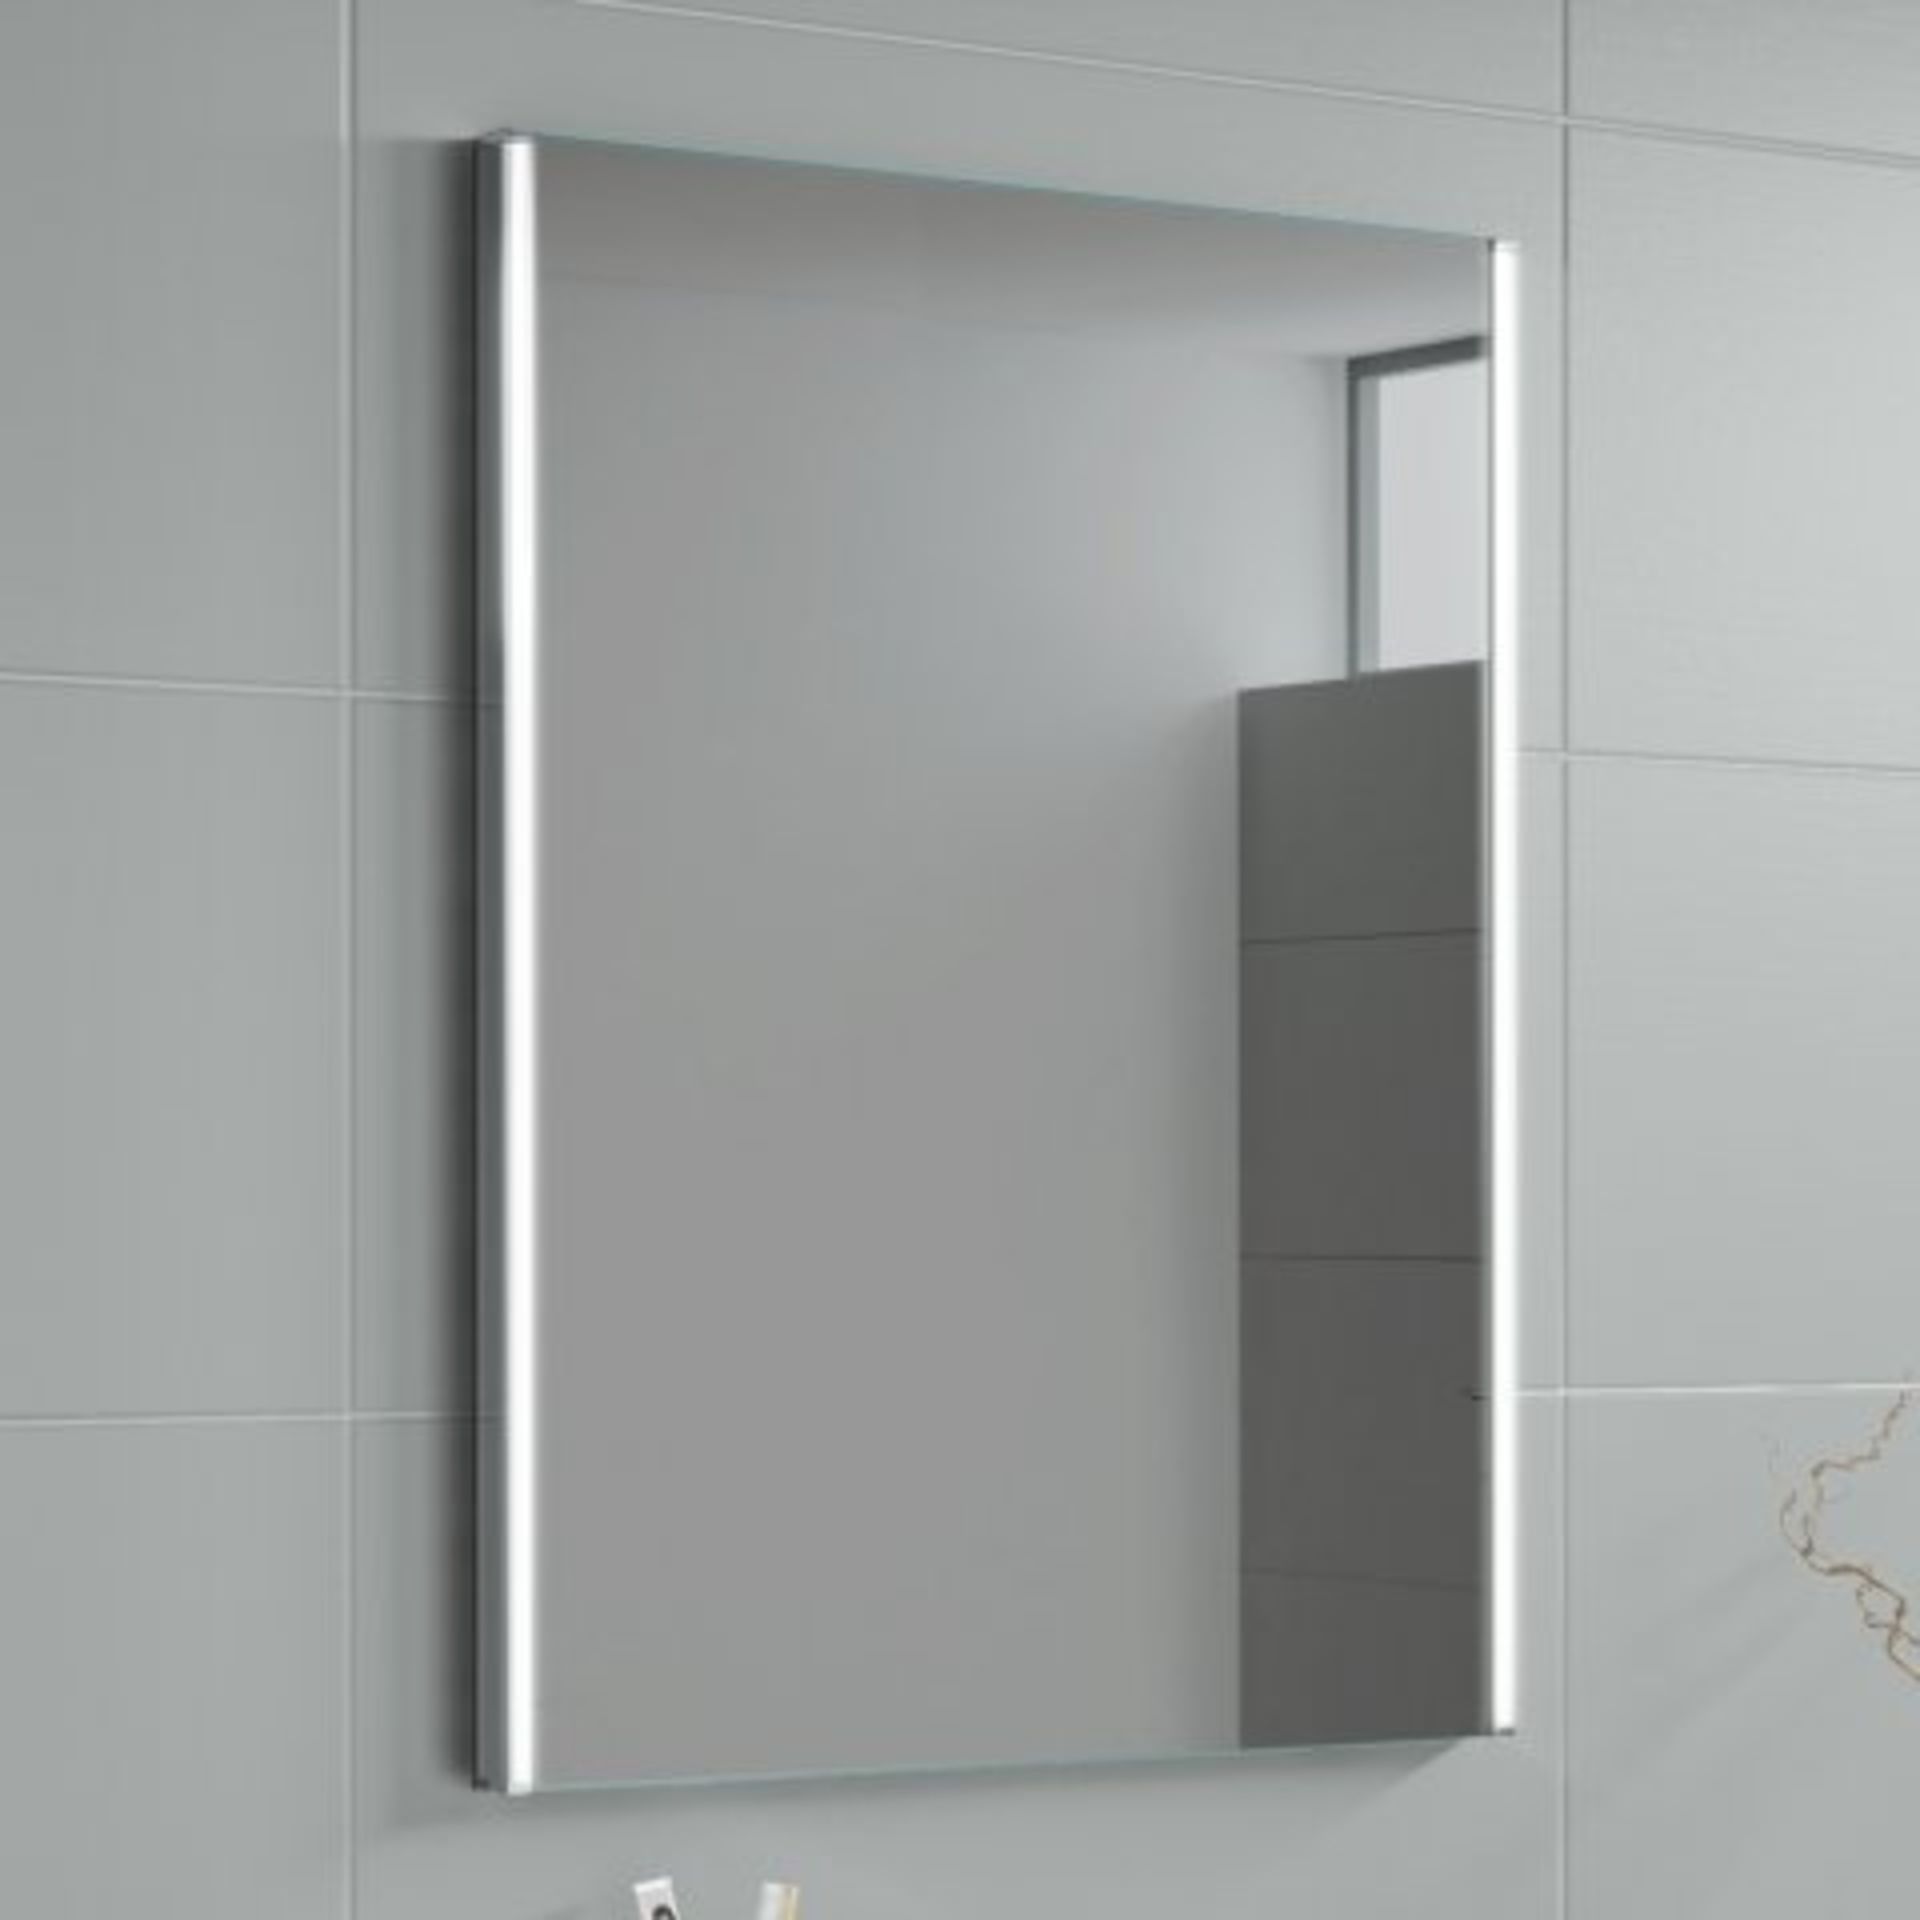 (P41) 500x700mm Lunar LED Mirror - Battery Operated. RRP £249.99. Our ultra-flattering LED Battery - Image 3 of 4